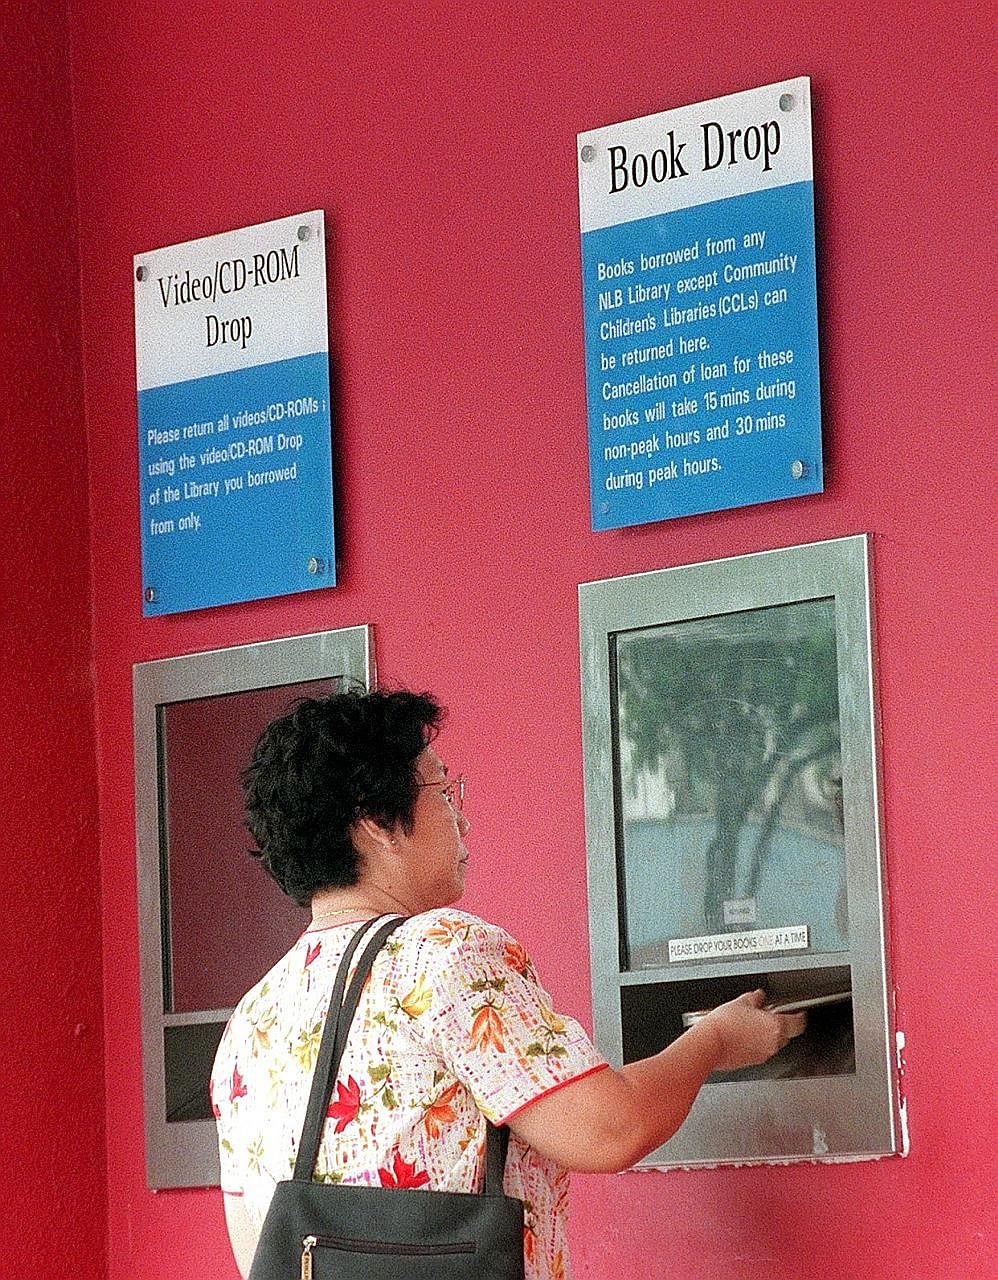 Library books being returned using a book drop. The National Library Board has other avenues to encourage prompt return of items, such as a free e-mail reminder service.